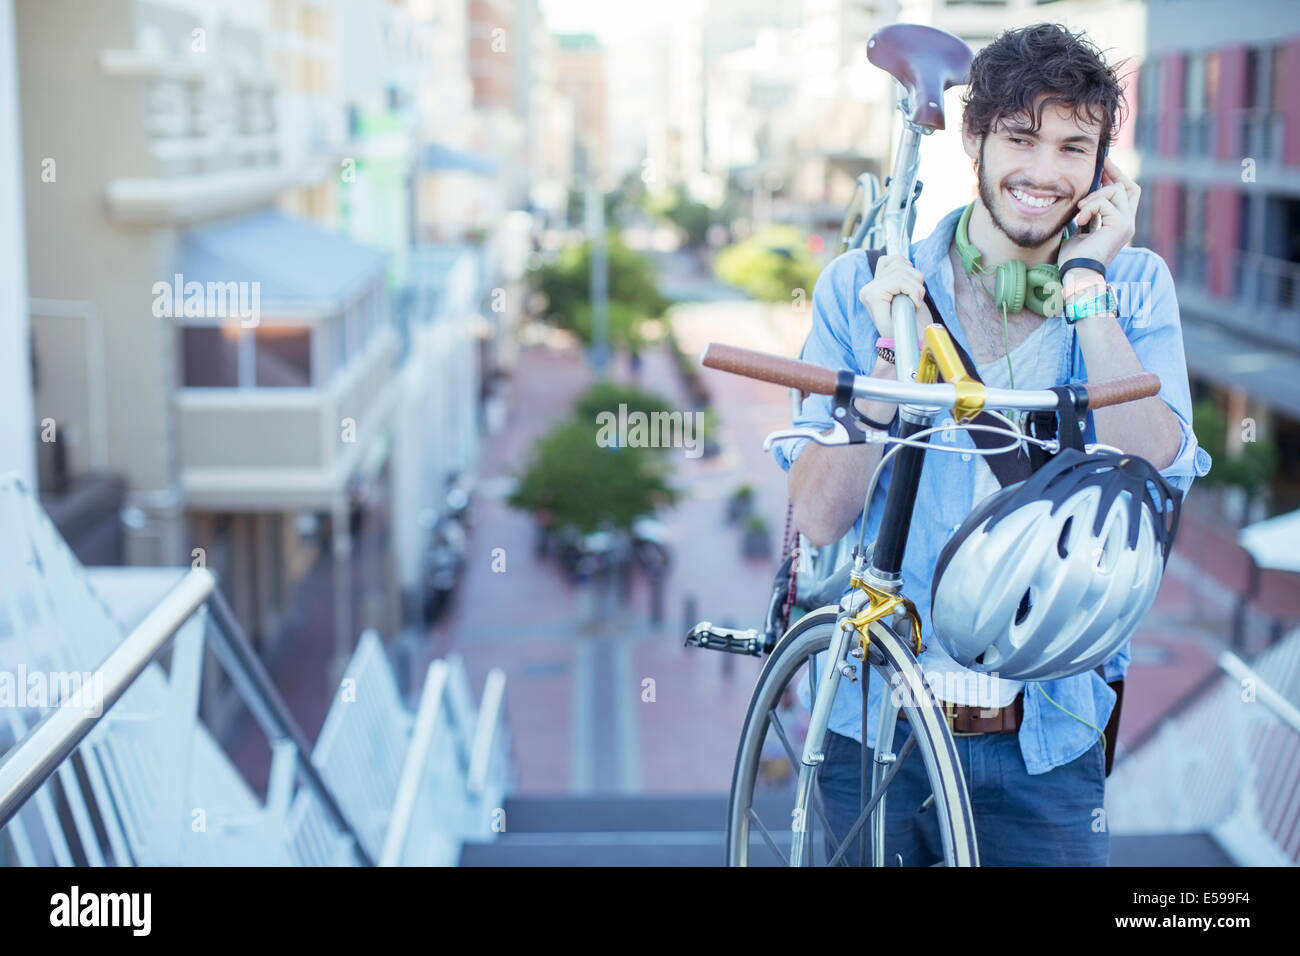 Man carrying bicycle on city steps Stock Photo